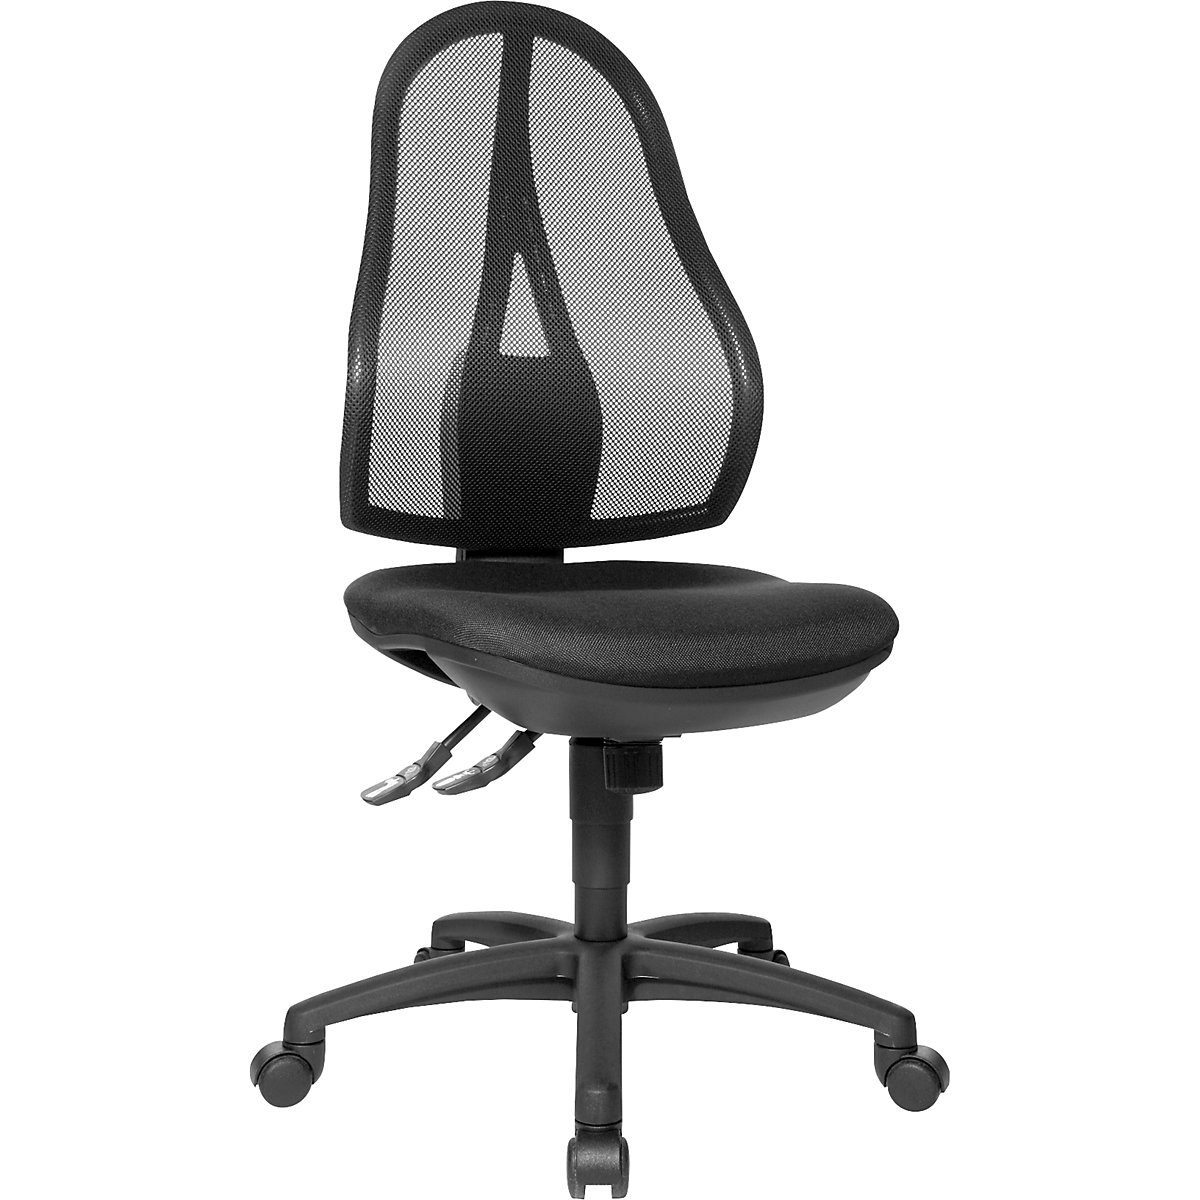 OPEN POINT SY office swivel chair – Topstar, without armrests, mesh back rest in black, black covering-6